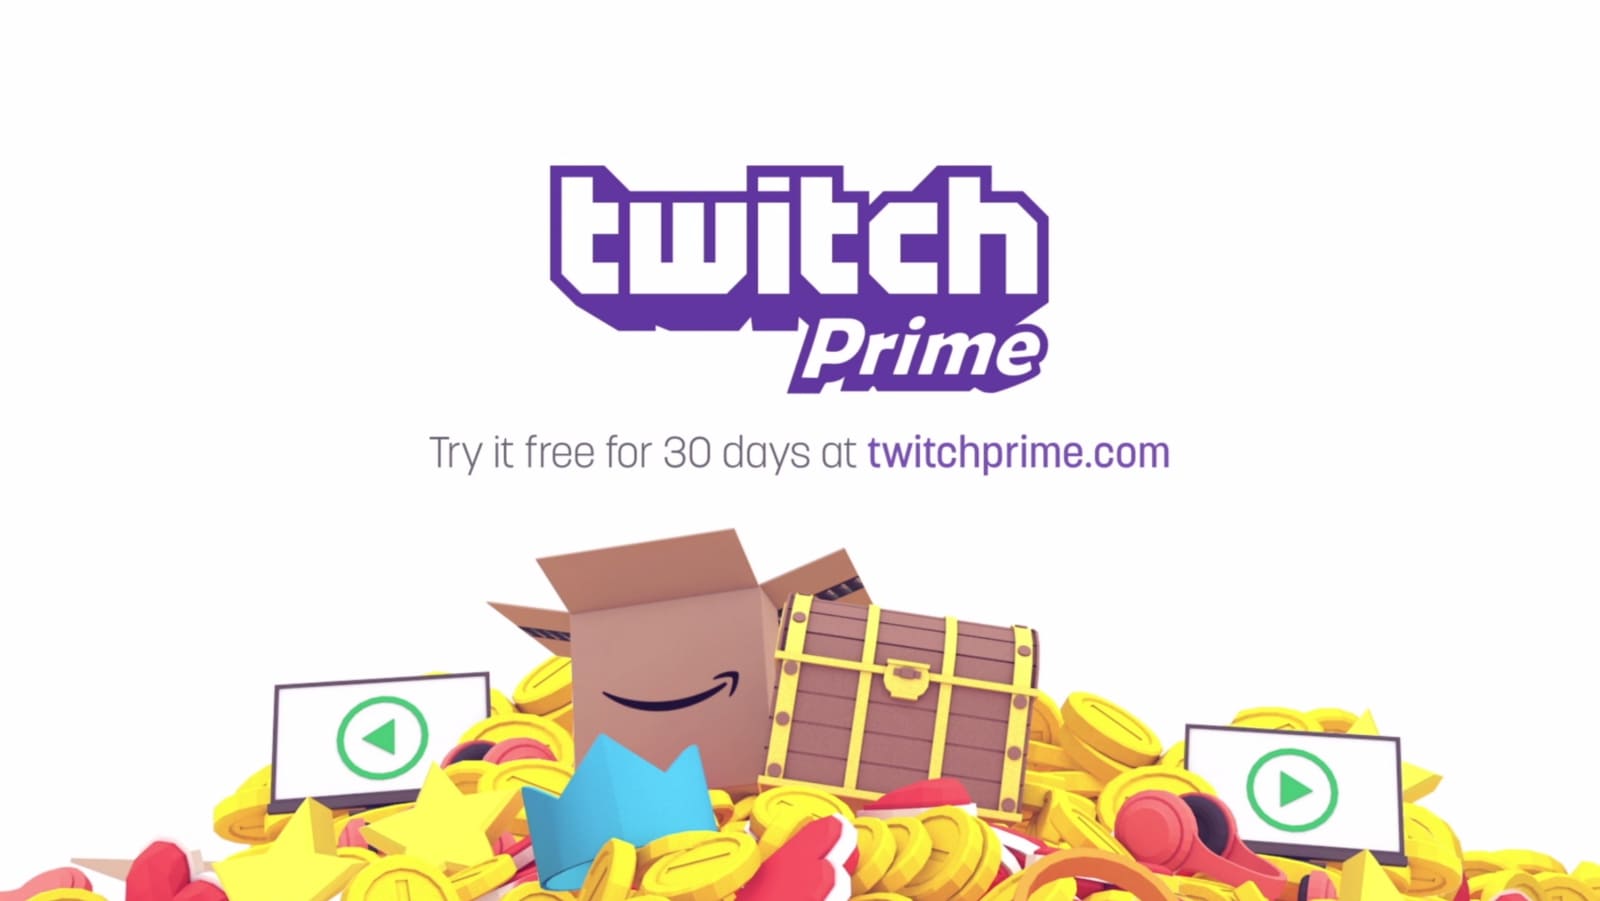 How to subscribe for free Twitch Prime